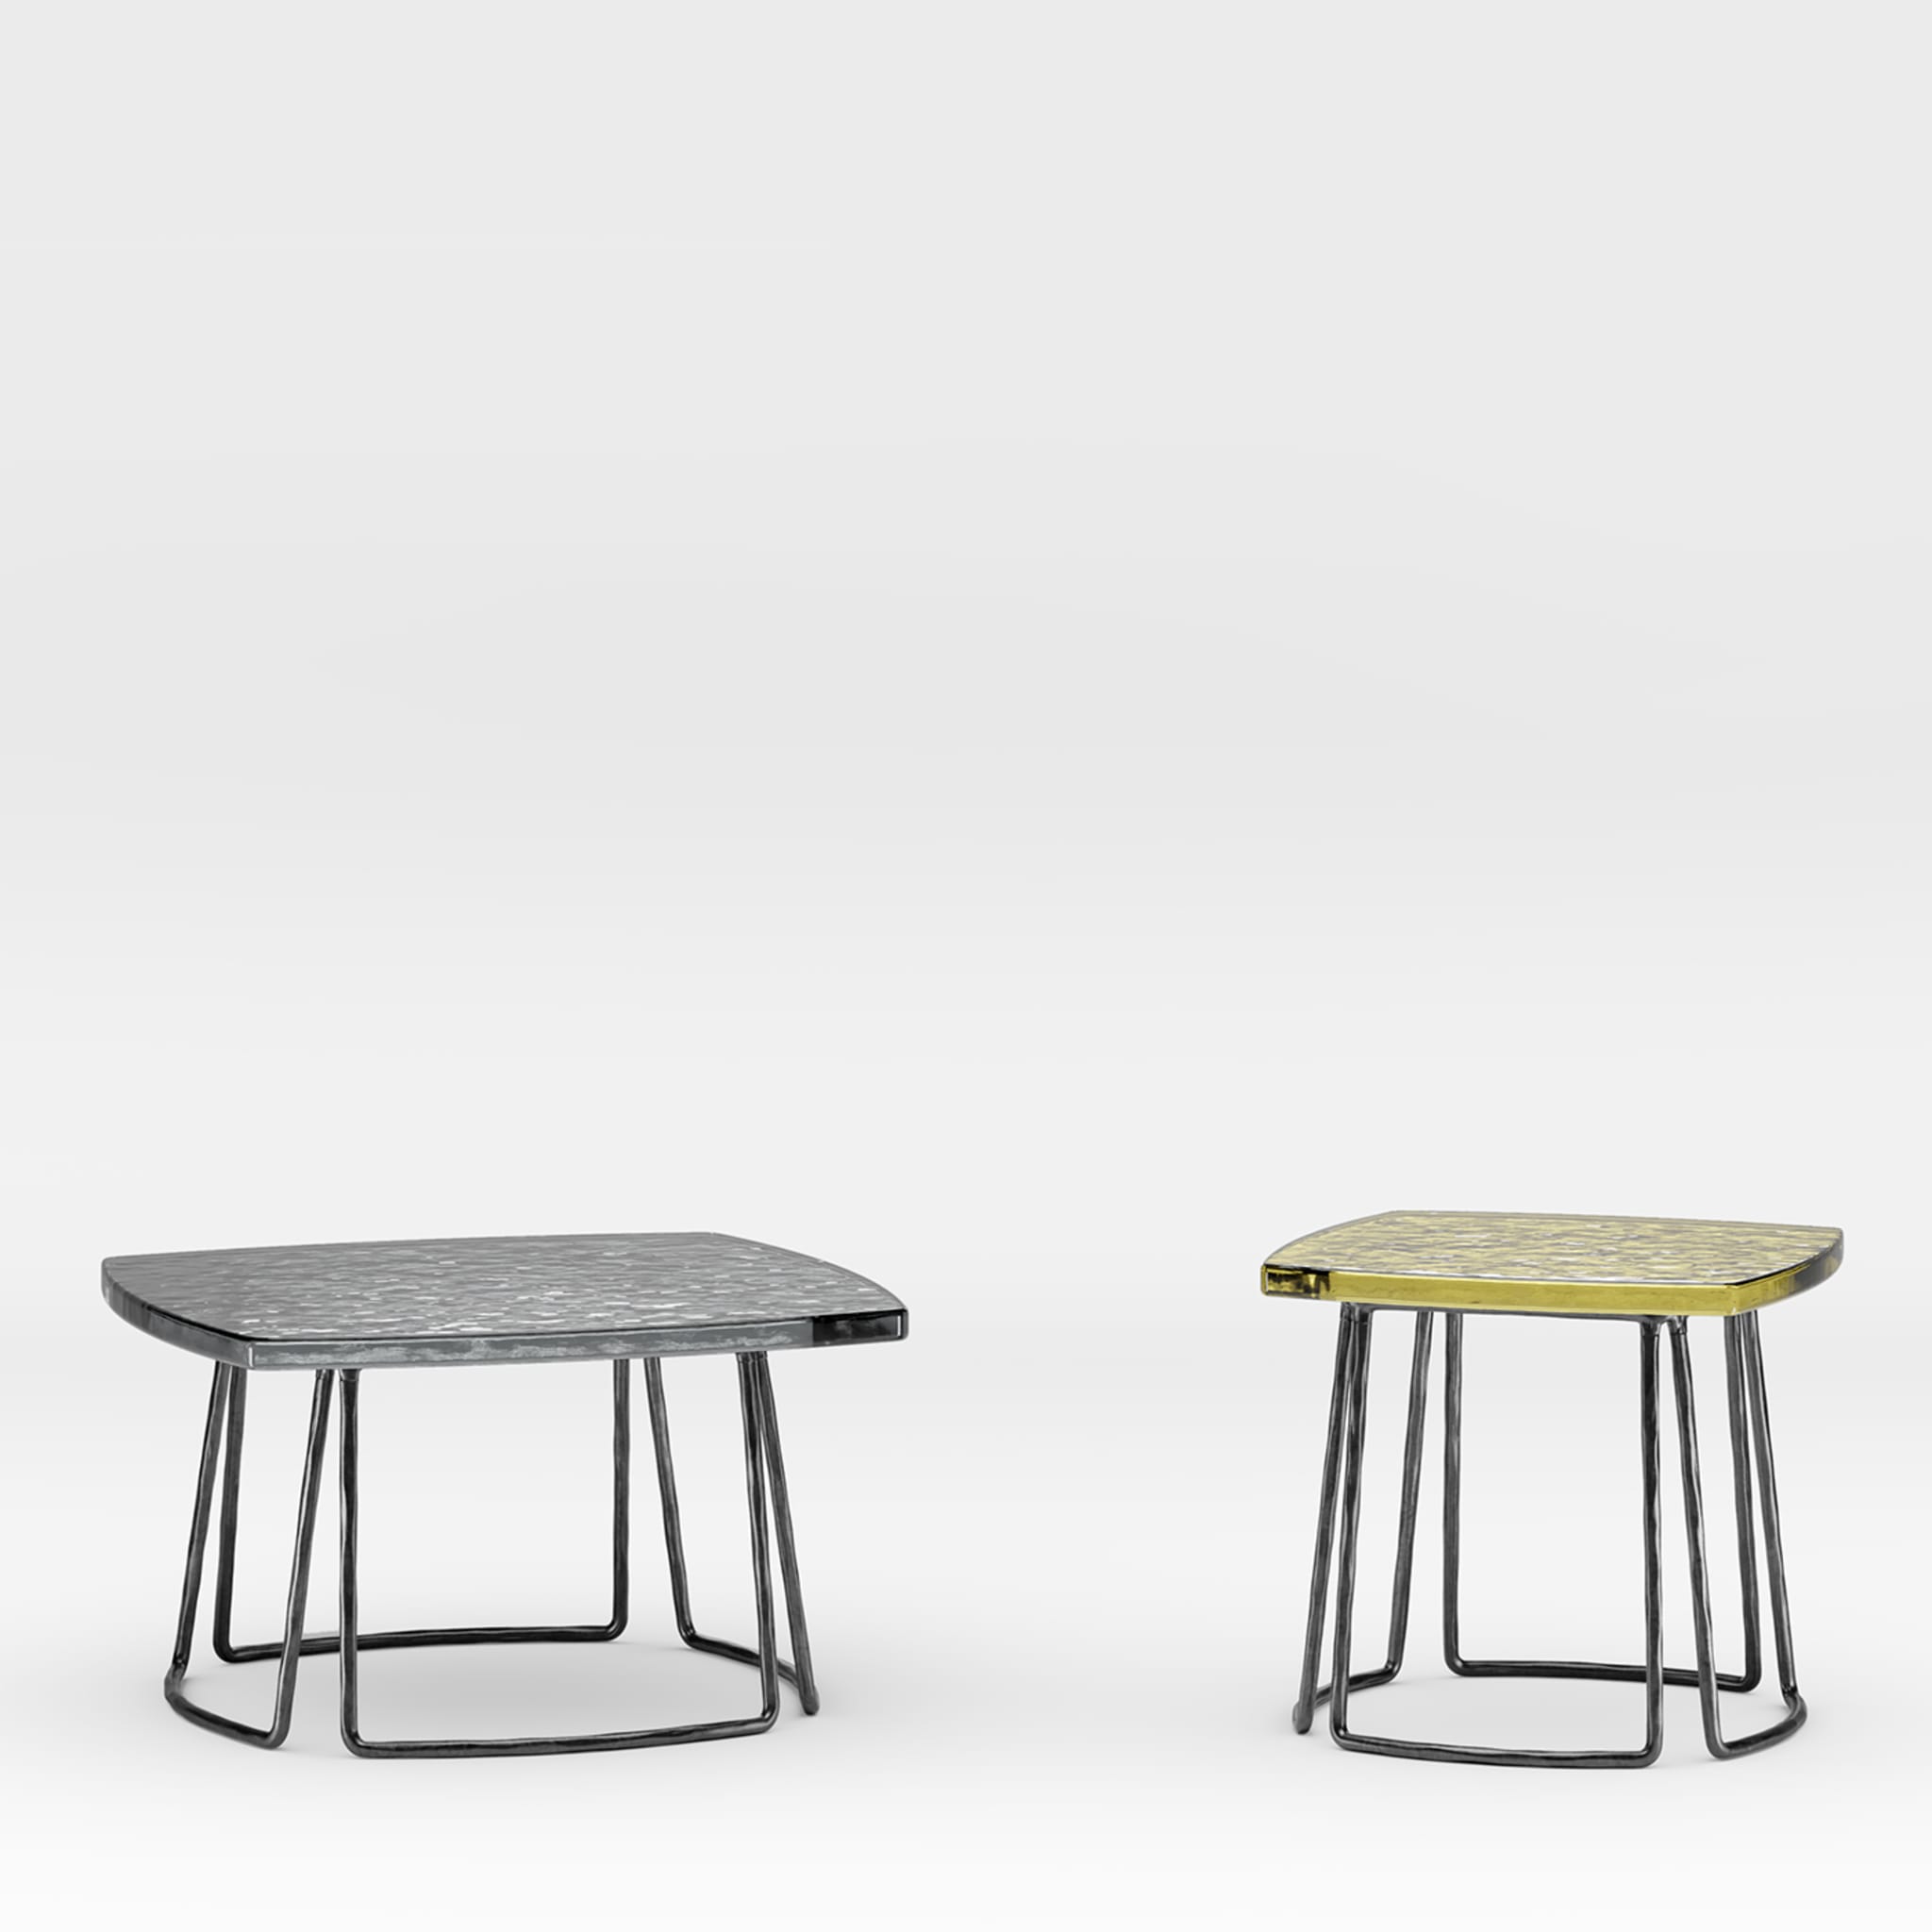 Type Tall Green Side Table by Stormo Studio - Alternative view 2